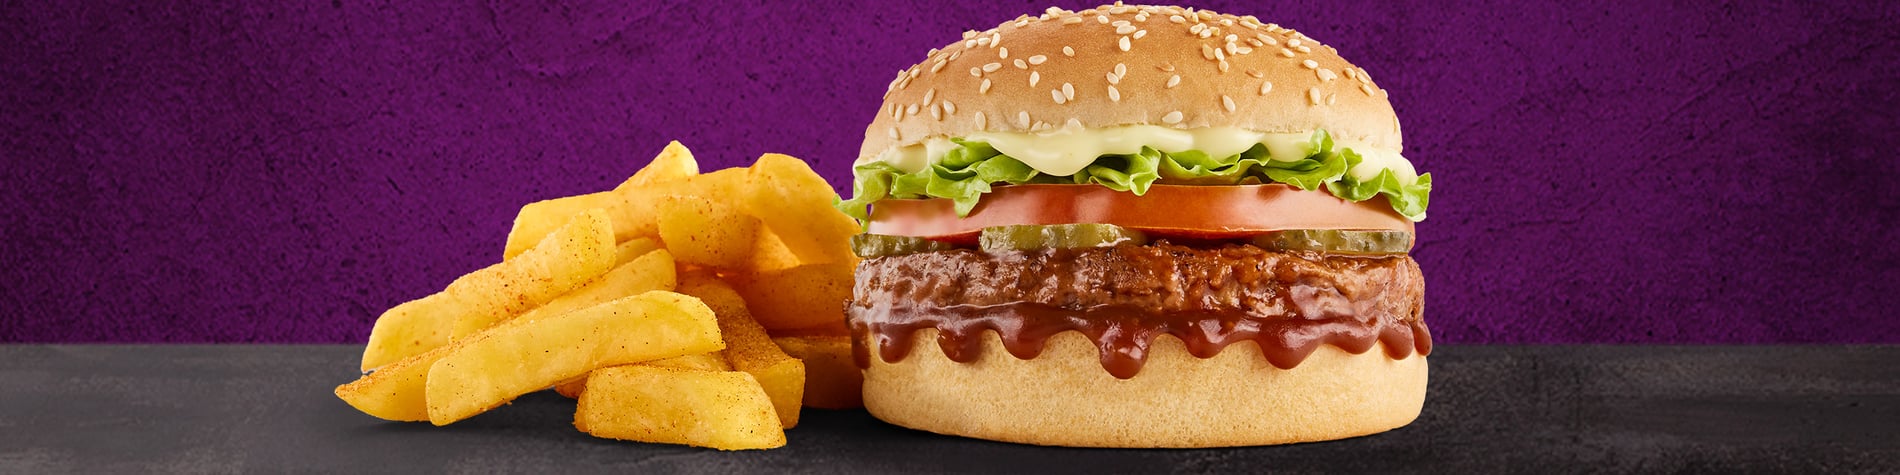 The NEW Mo’MjojoTM Burger Meal from Steers® Fontainebleau. 2 Flame-Grilled pure beef patties, pineapple, macon, tomato, lettuce, and small Famous Hand-Cut Chips, on a purple background.